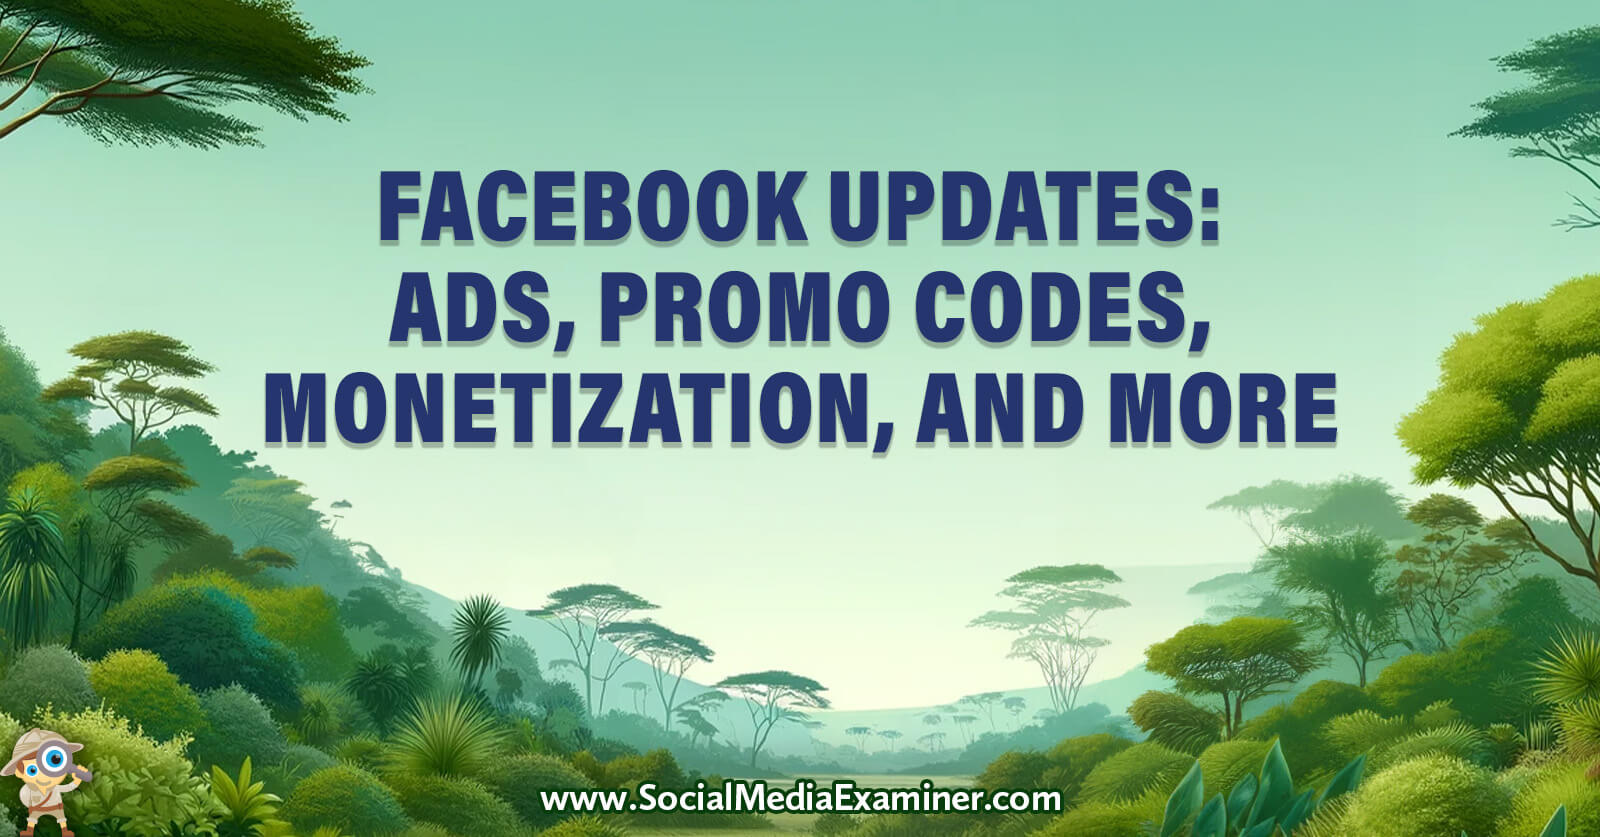 Facebook Updates: Ads, Promo Codes, Monetization, and More by Social Media Examiner